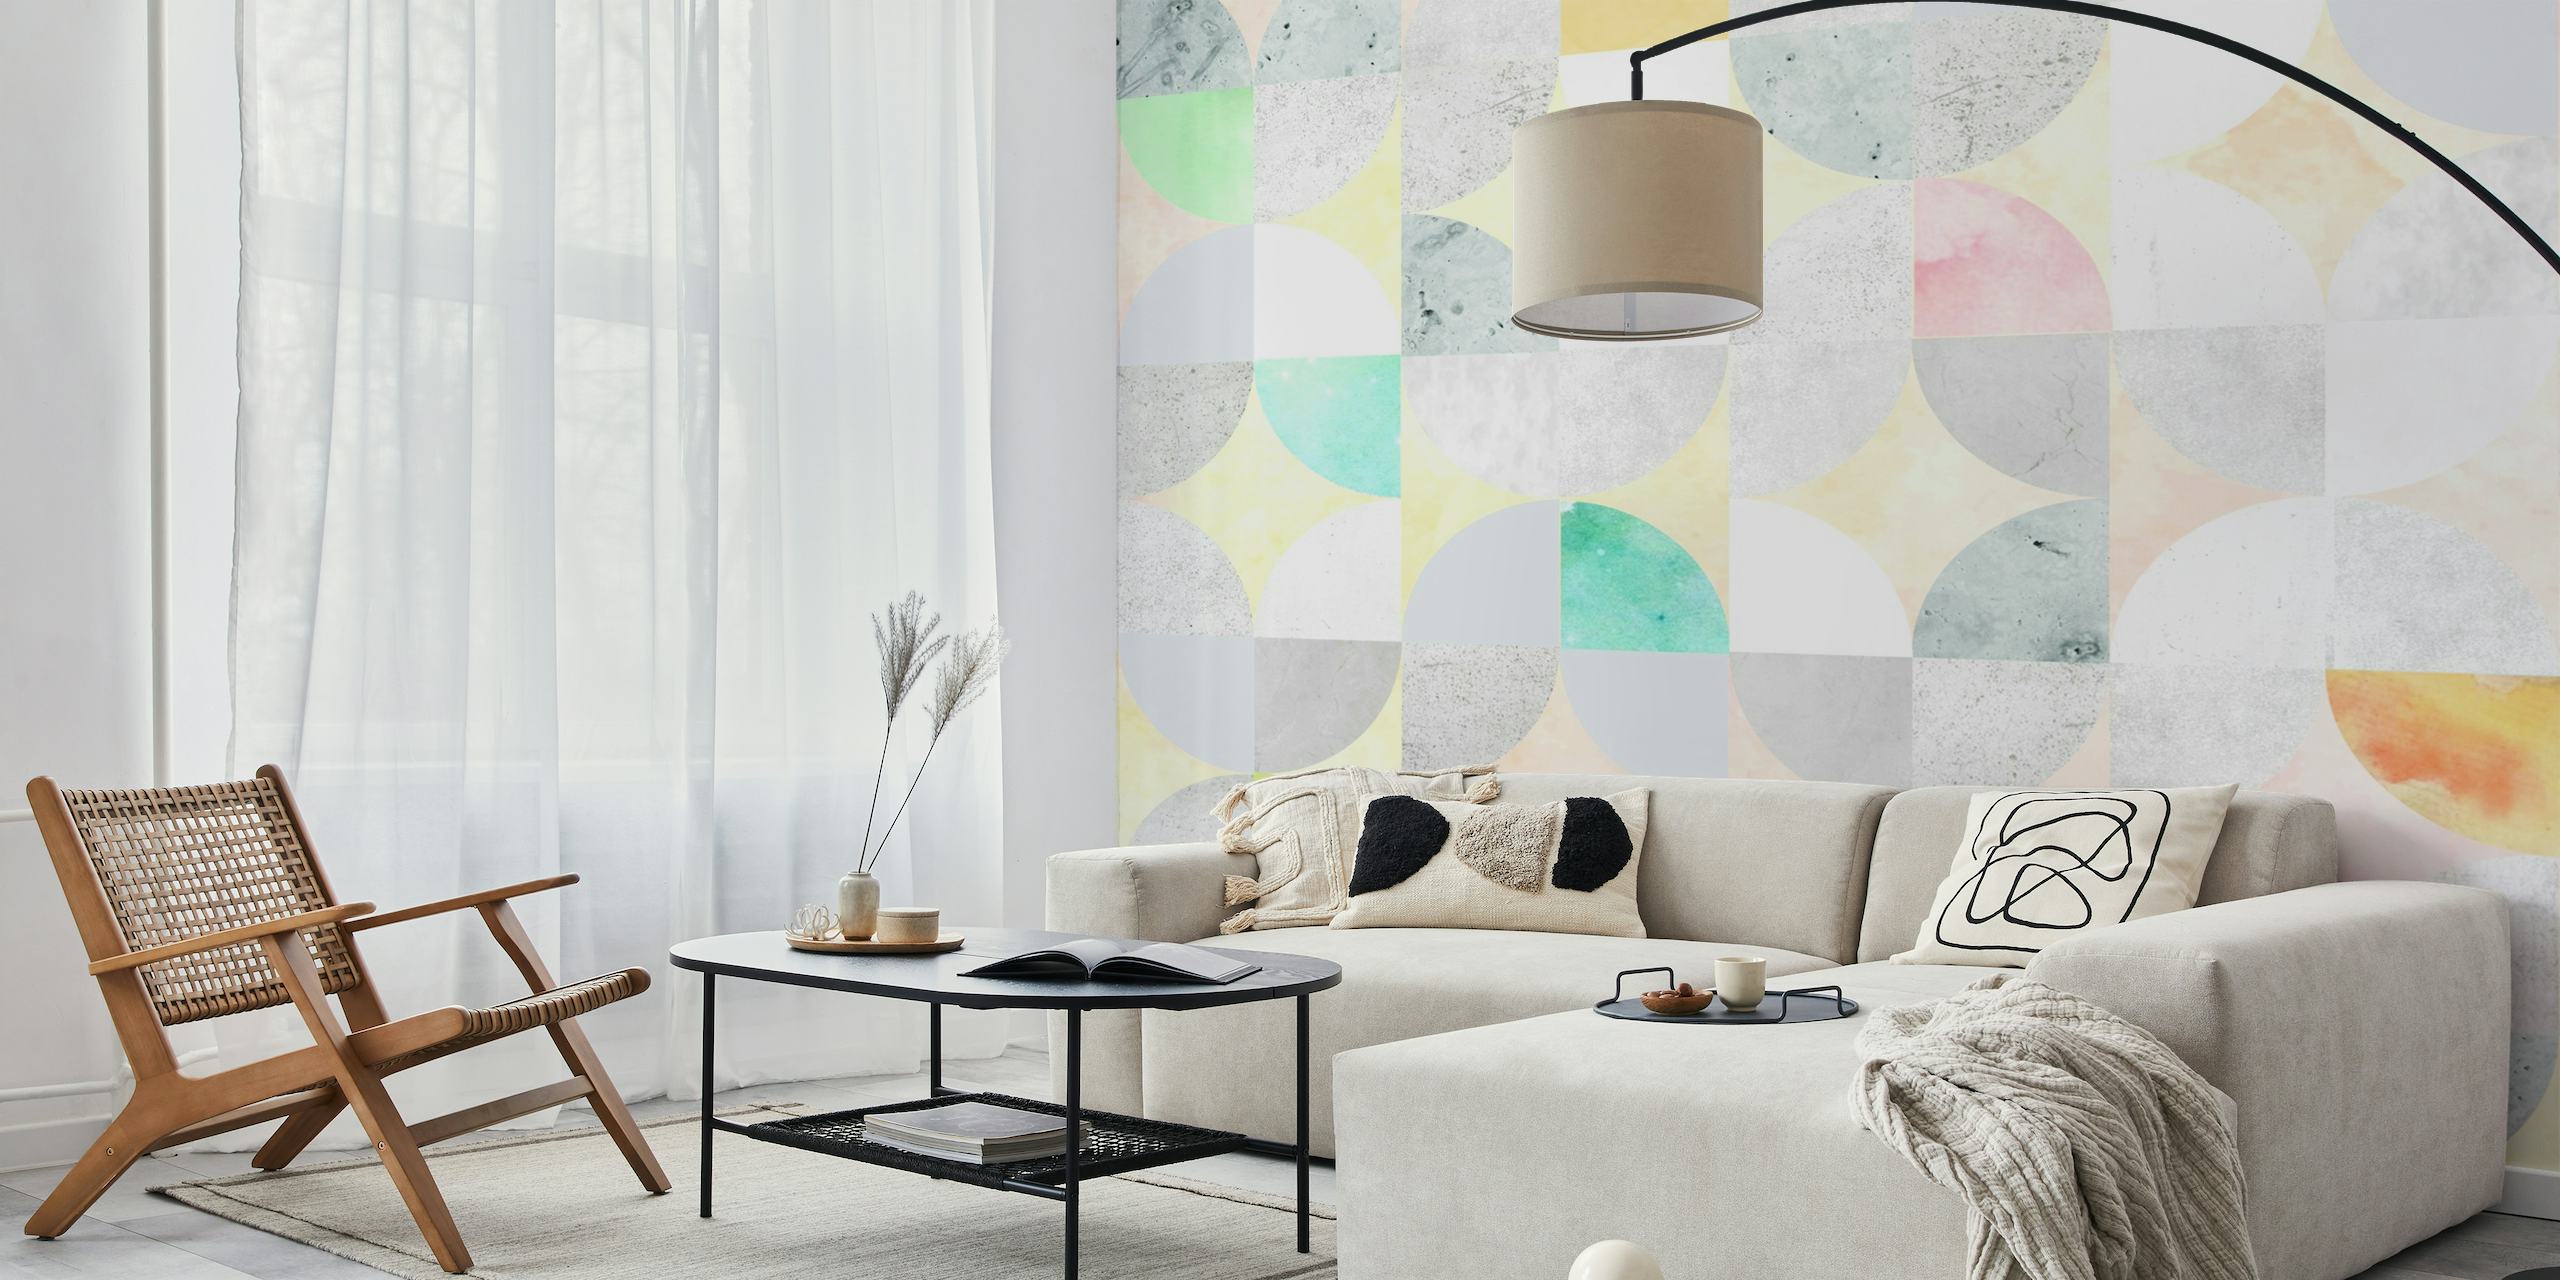 Stylish geometric concrete wallpaper featuring a mix of soft colors and concrete textures in a modern pattern